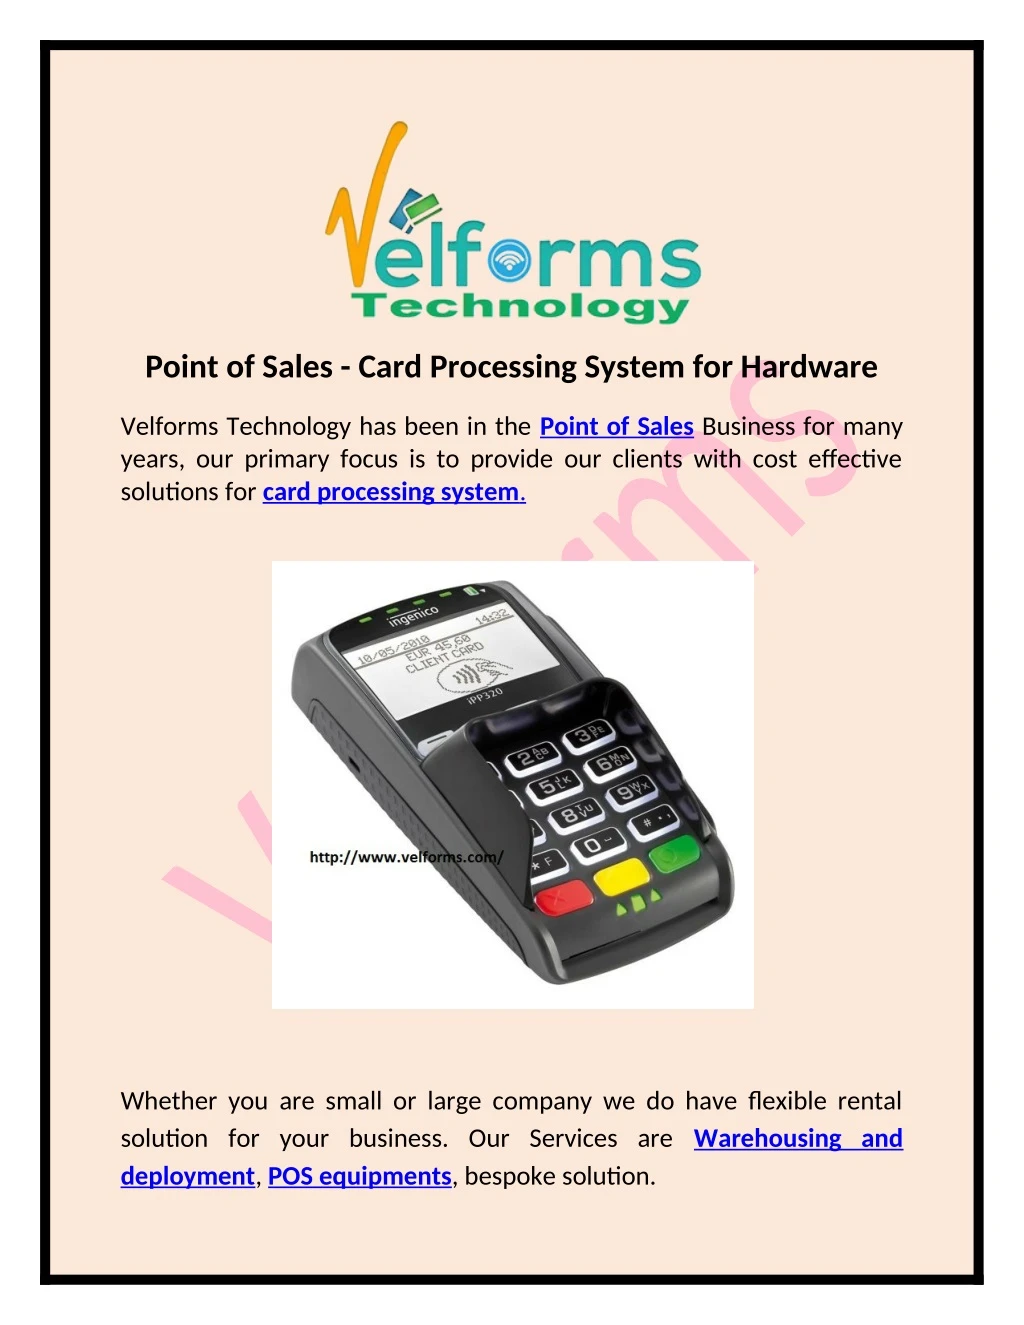 point of sales card processing system for hardware